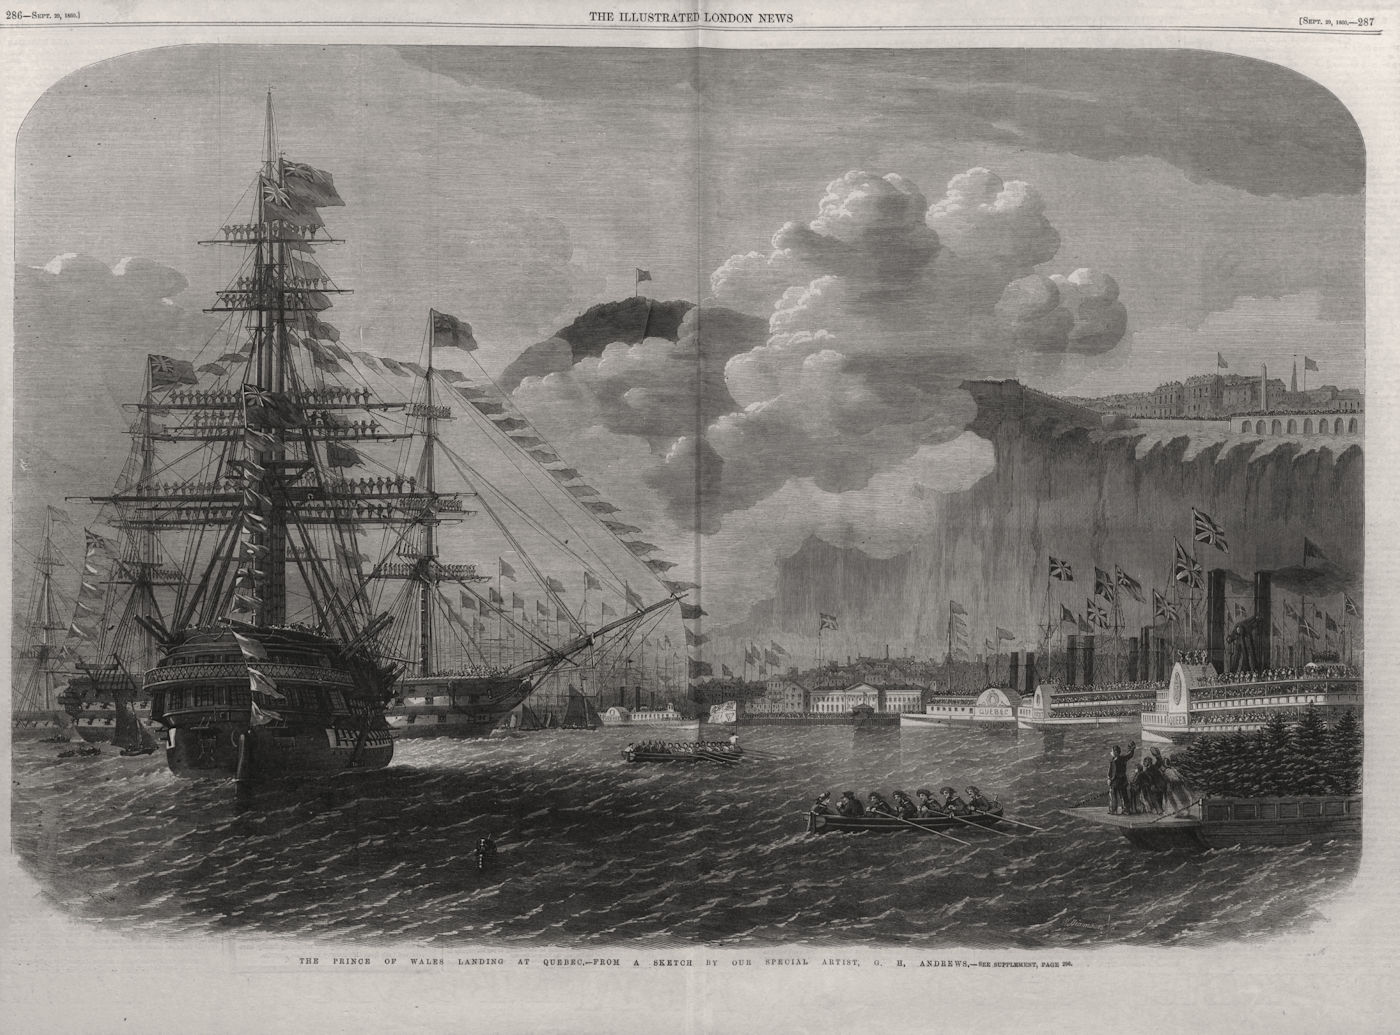 Associate Product The Prince of Wales (later King Edward VII) landing at Quebec. Canada 1860